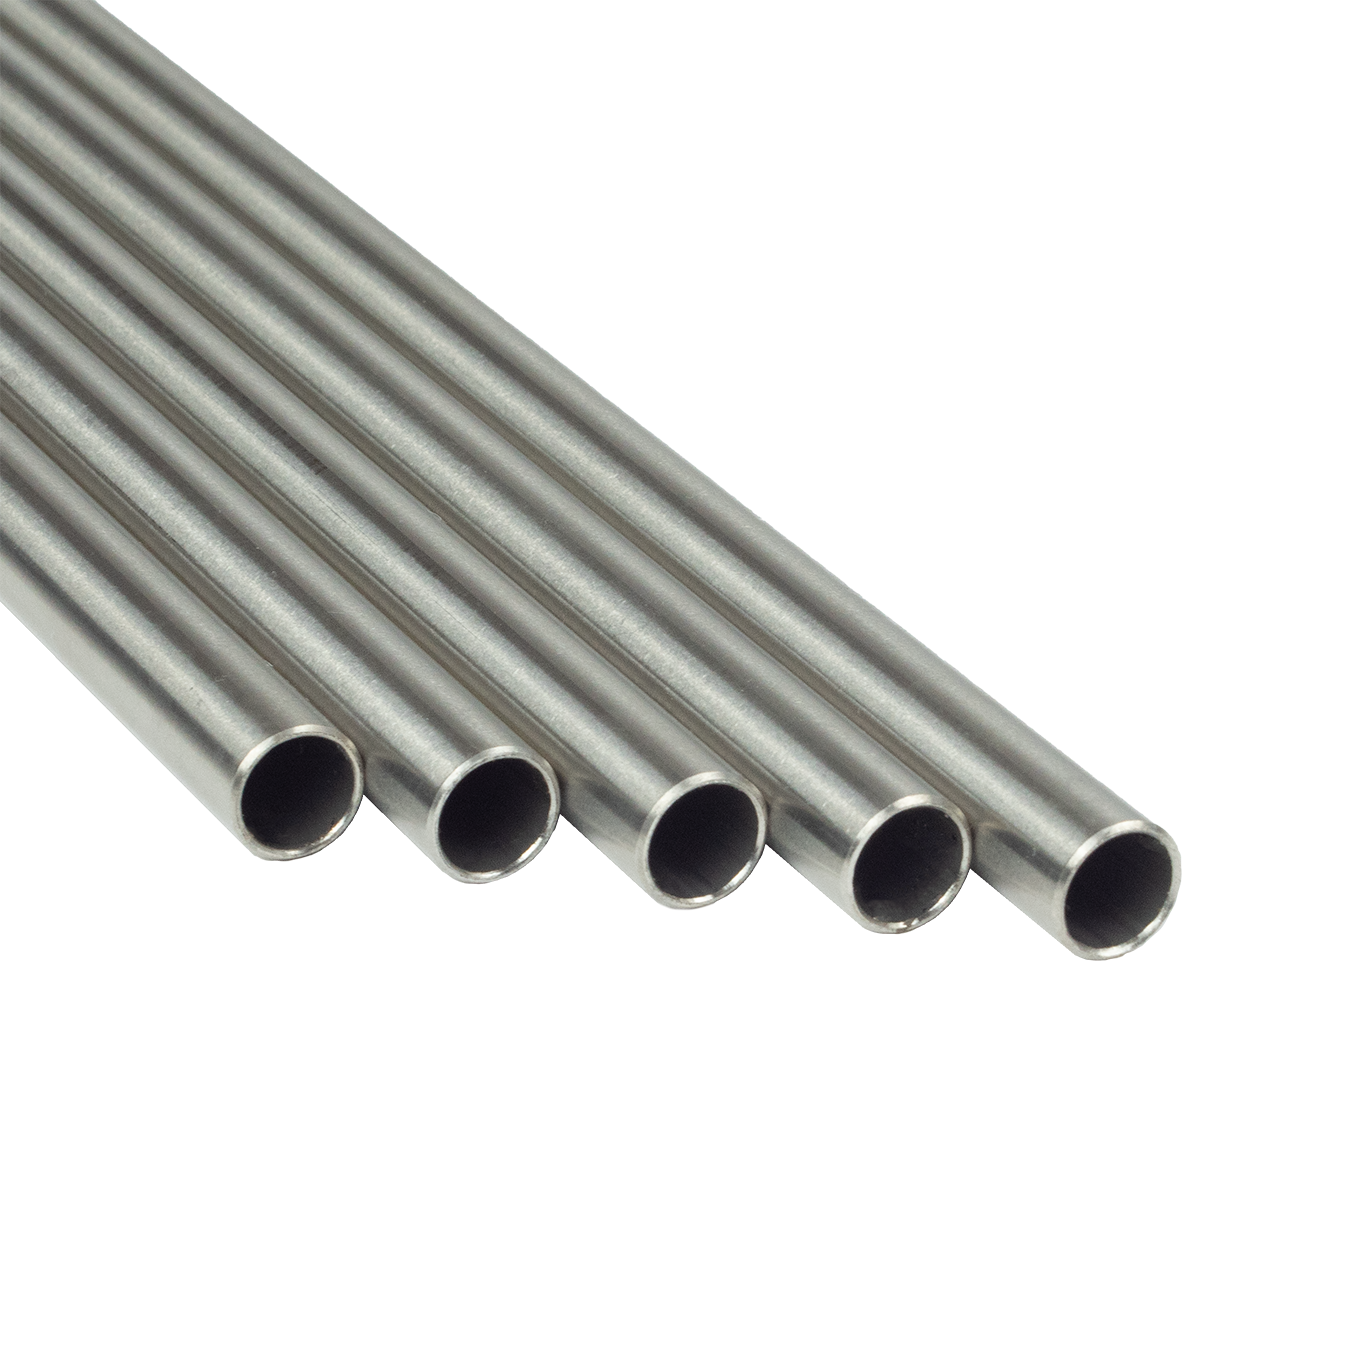 SFS Stand Tube - Ø 10 x 1 mm, length 500 mm - stainless steel